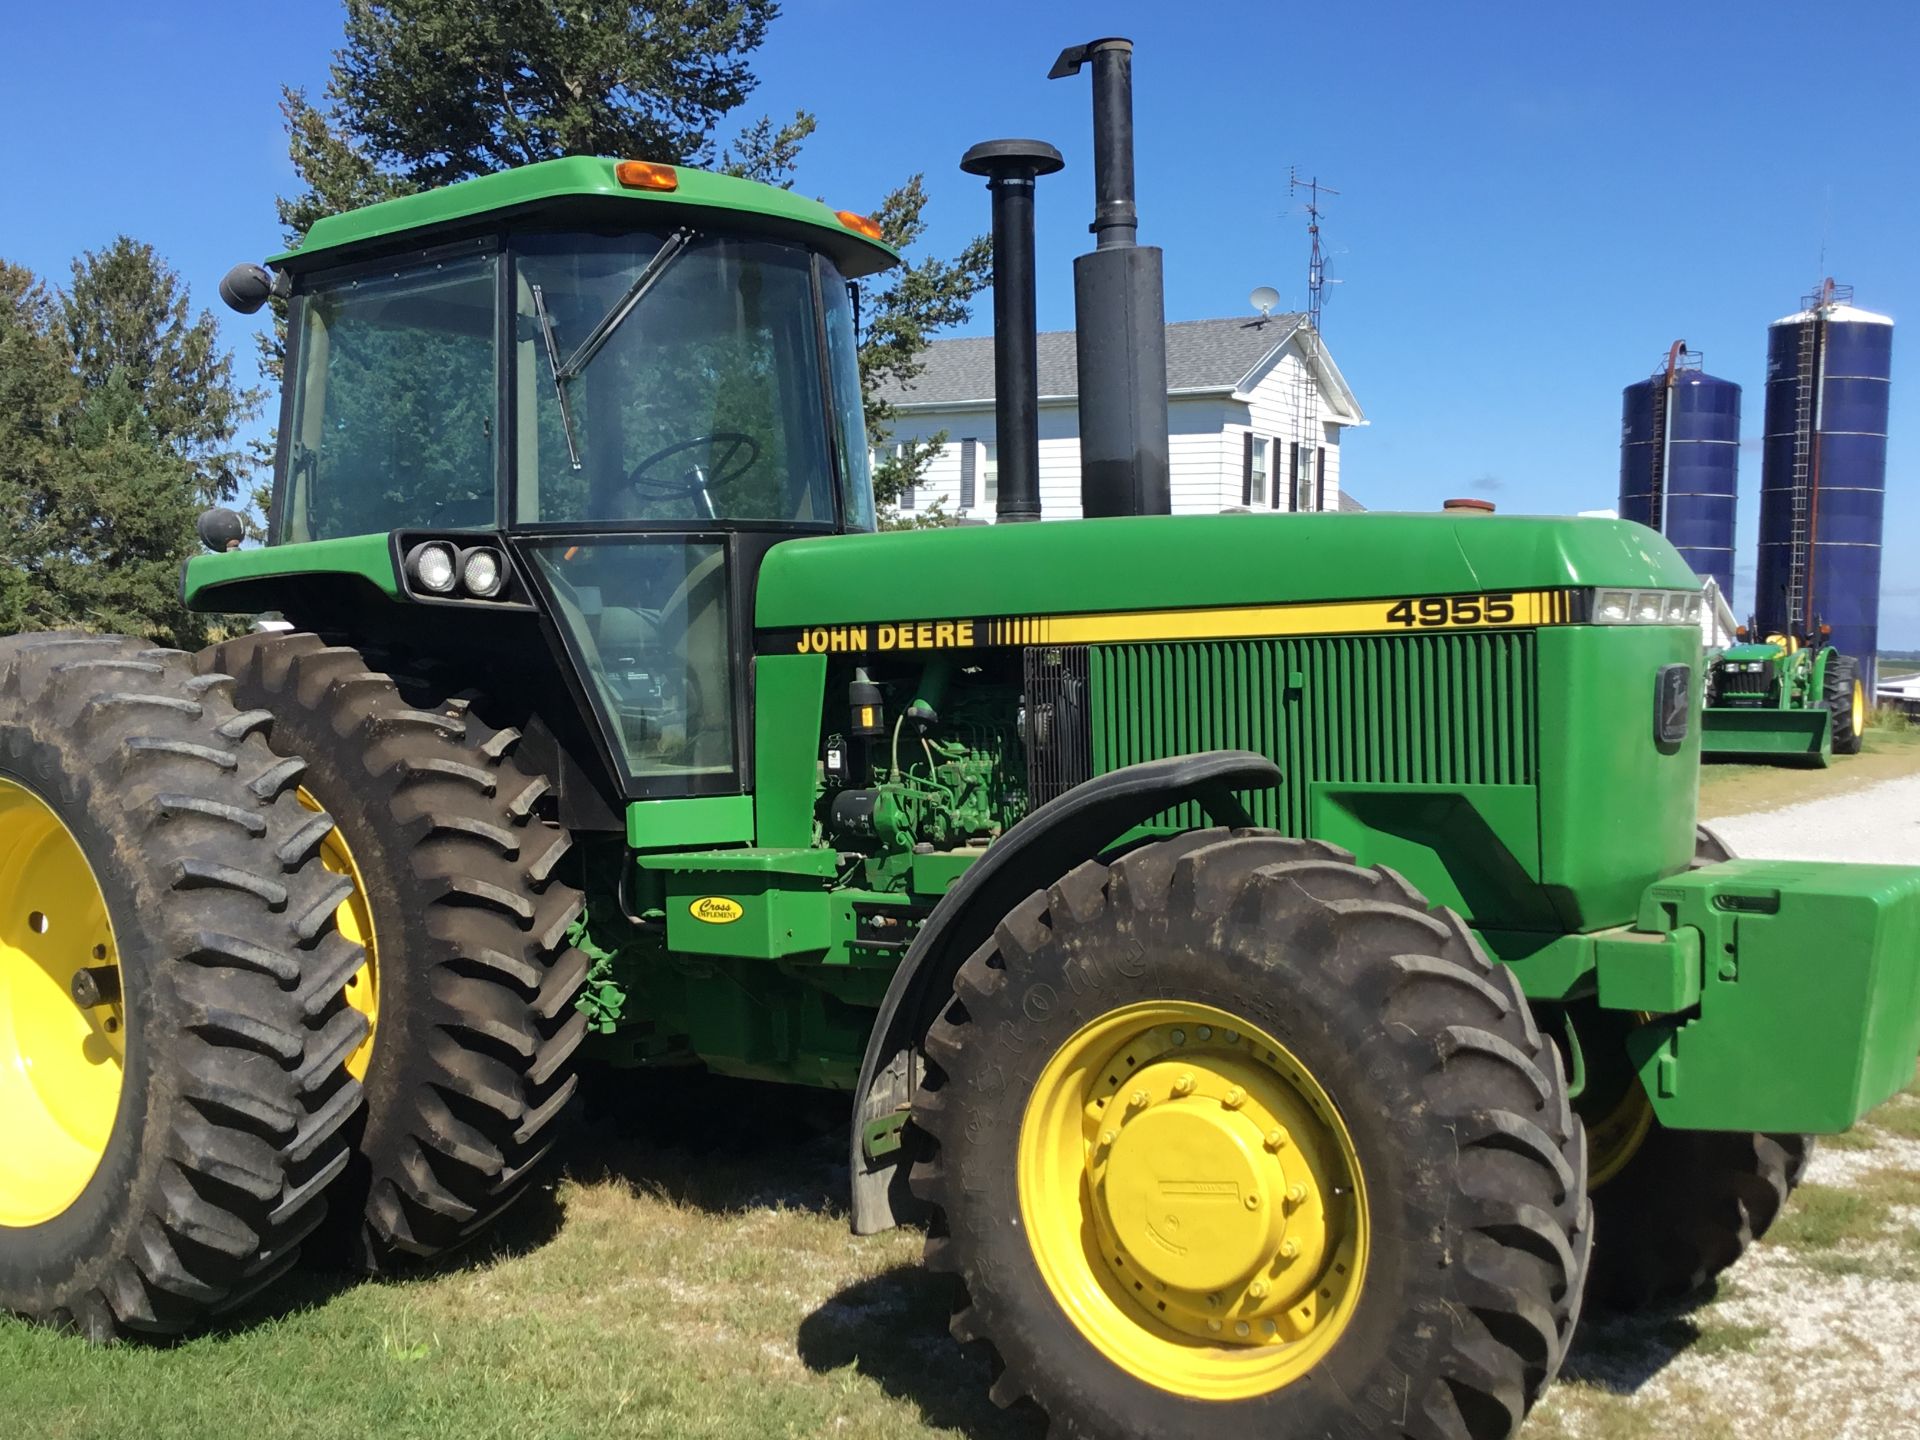 1990 JD 4955 MFWD, 15 Speed Power Shift, 3 Hyd. Remotes, 16 Front Weights, 500# Rear Weights, Hub - Image 11 of 20